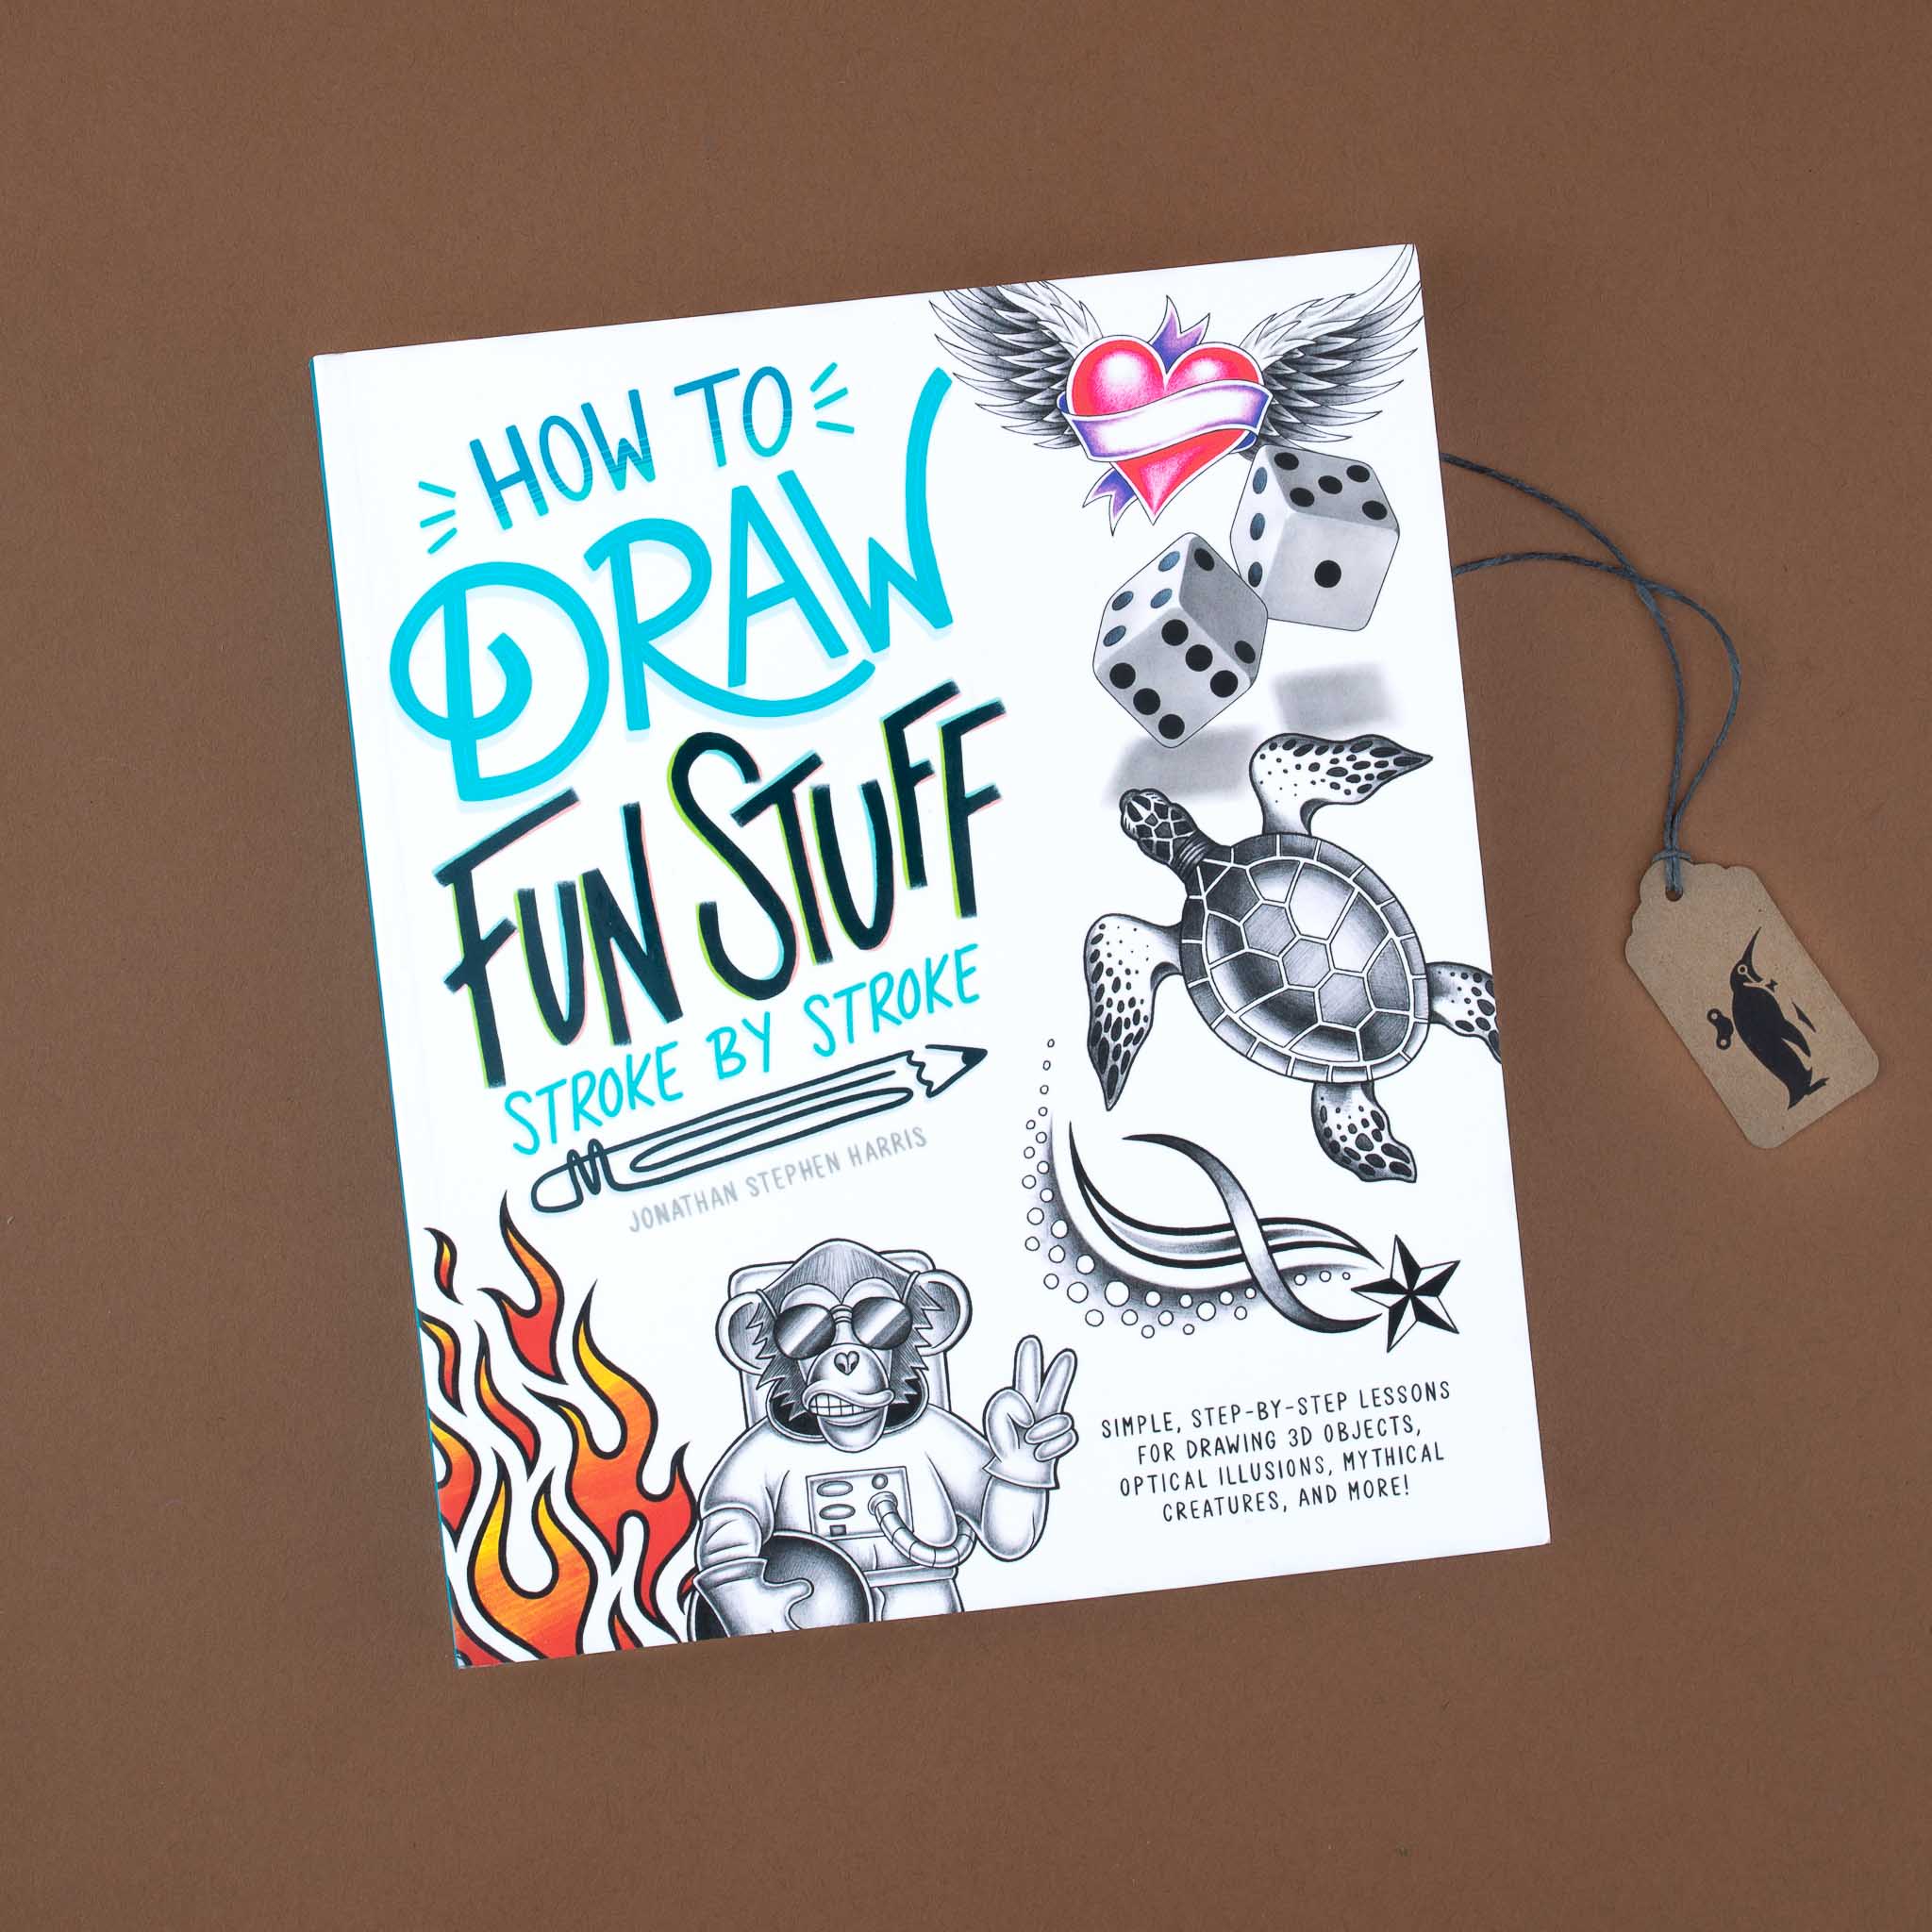 How to Draw and Sketch Cool Stuff for Kids: Step by Step Techniques 206  Pages (I Can Draw #1) (Paperback) | Mrs. Dalloway's Literary and Garden Arts